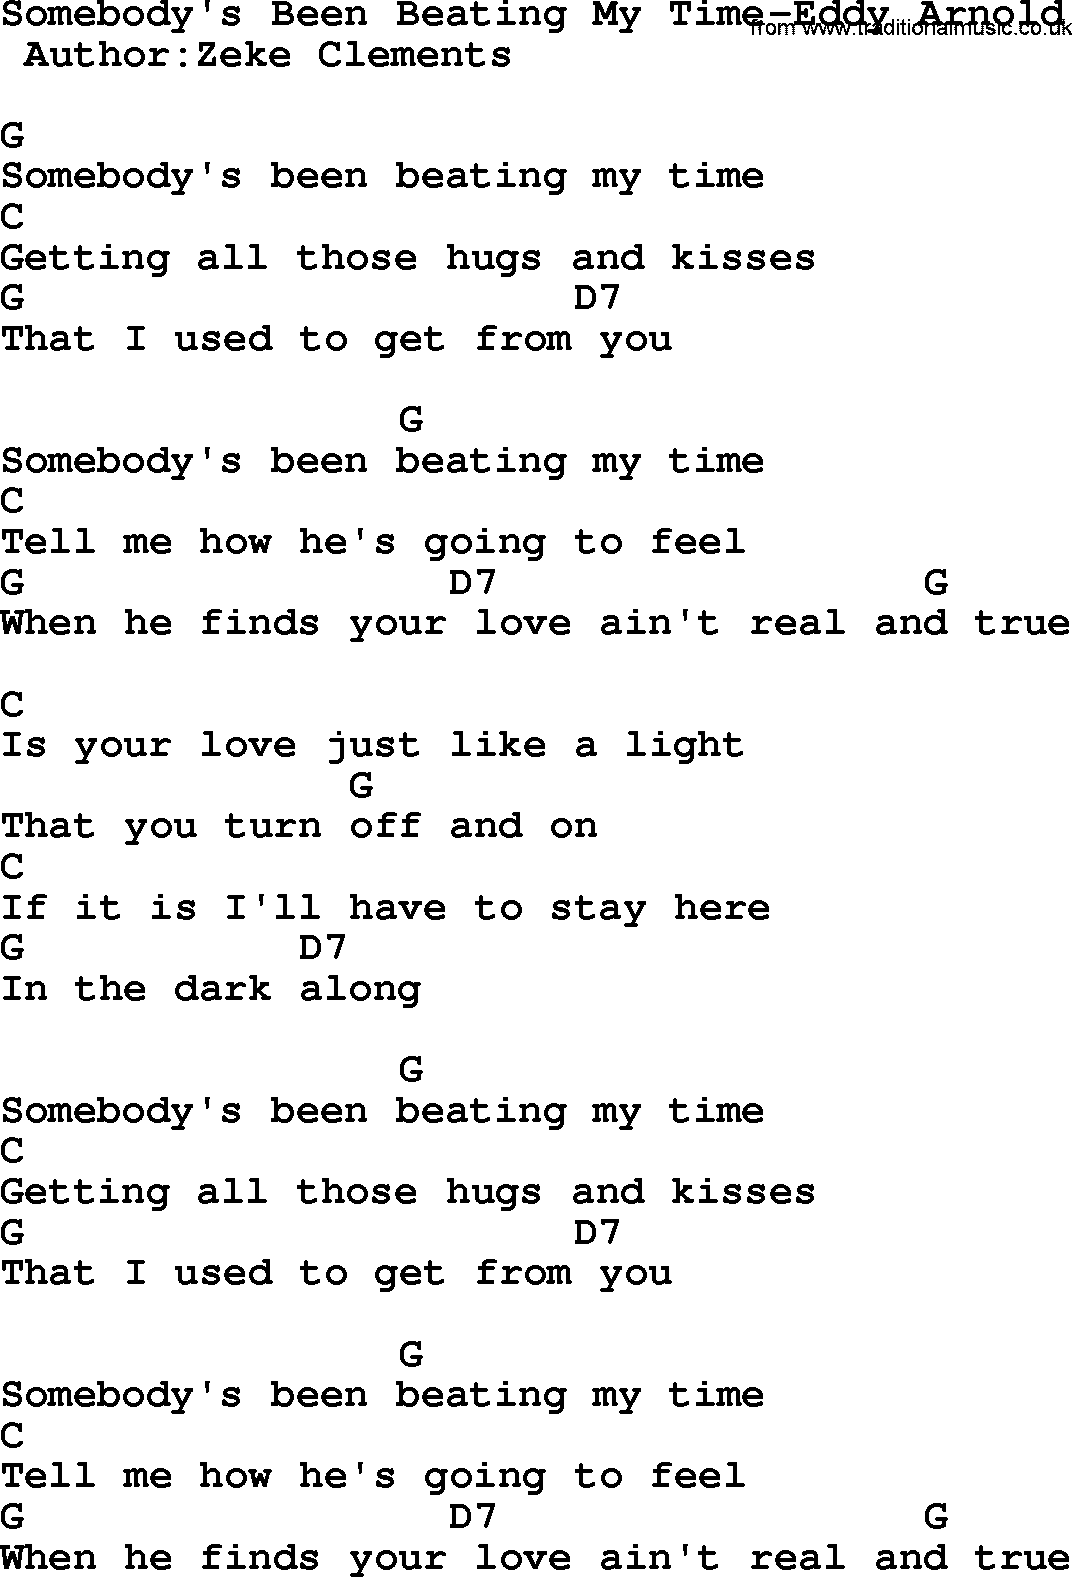 Country music song: Somebody's Been Beating My Time-Eddy Arnold lyrics and chords